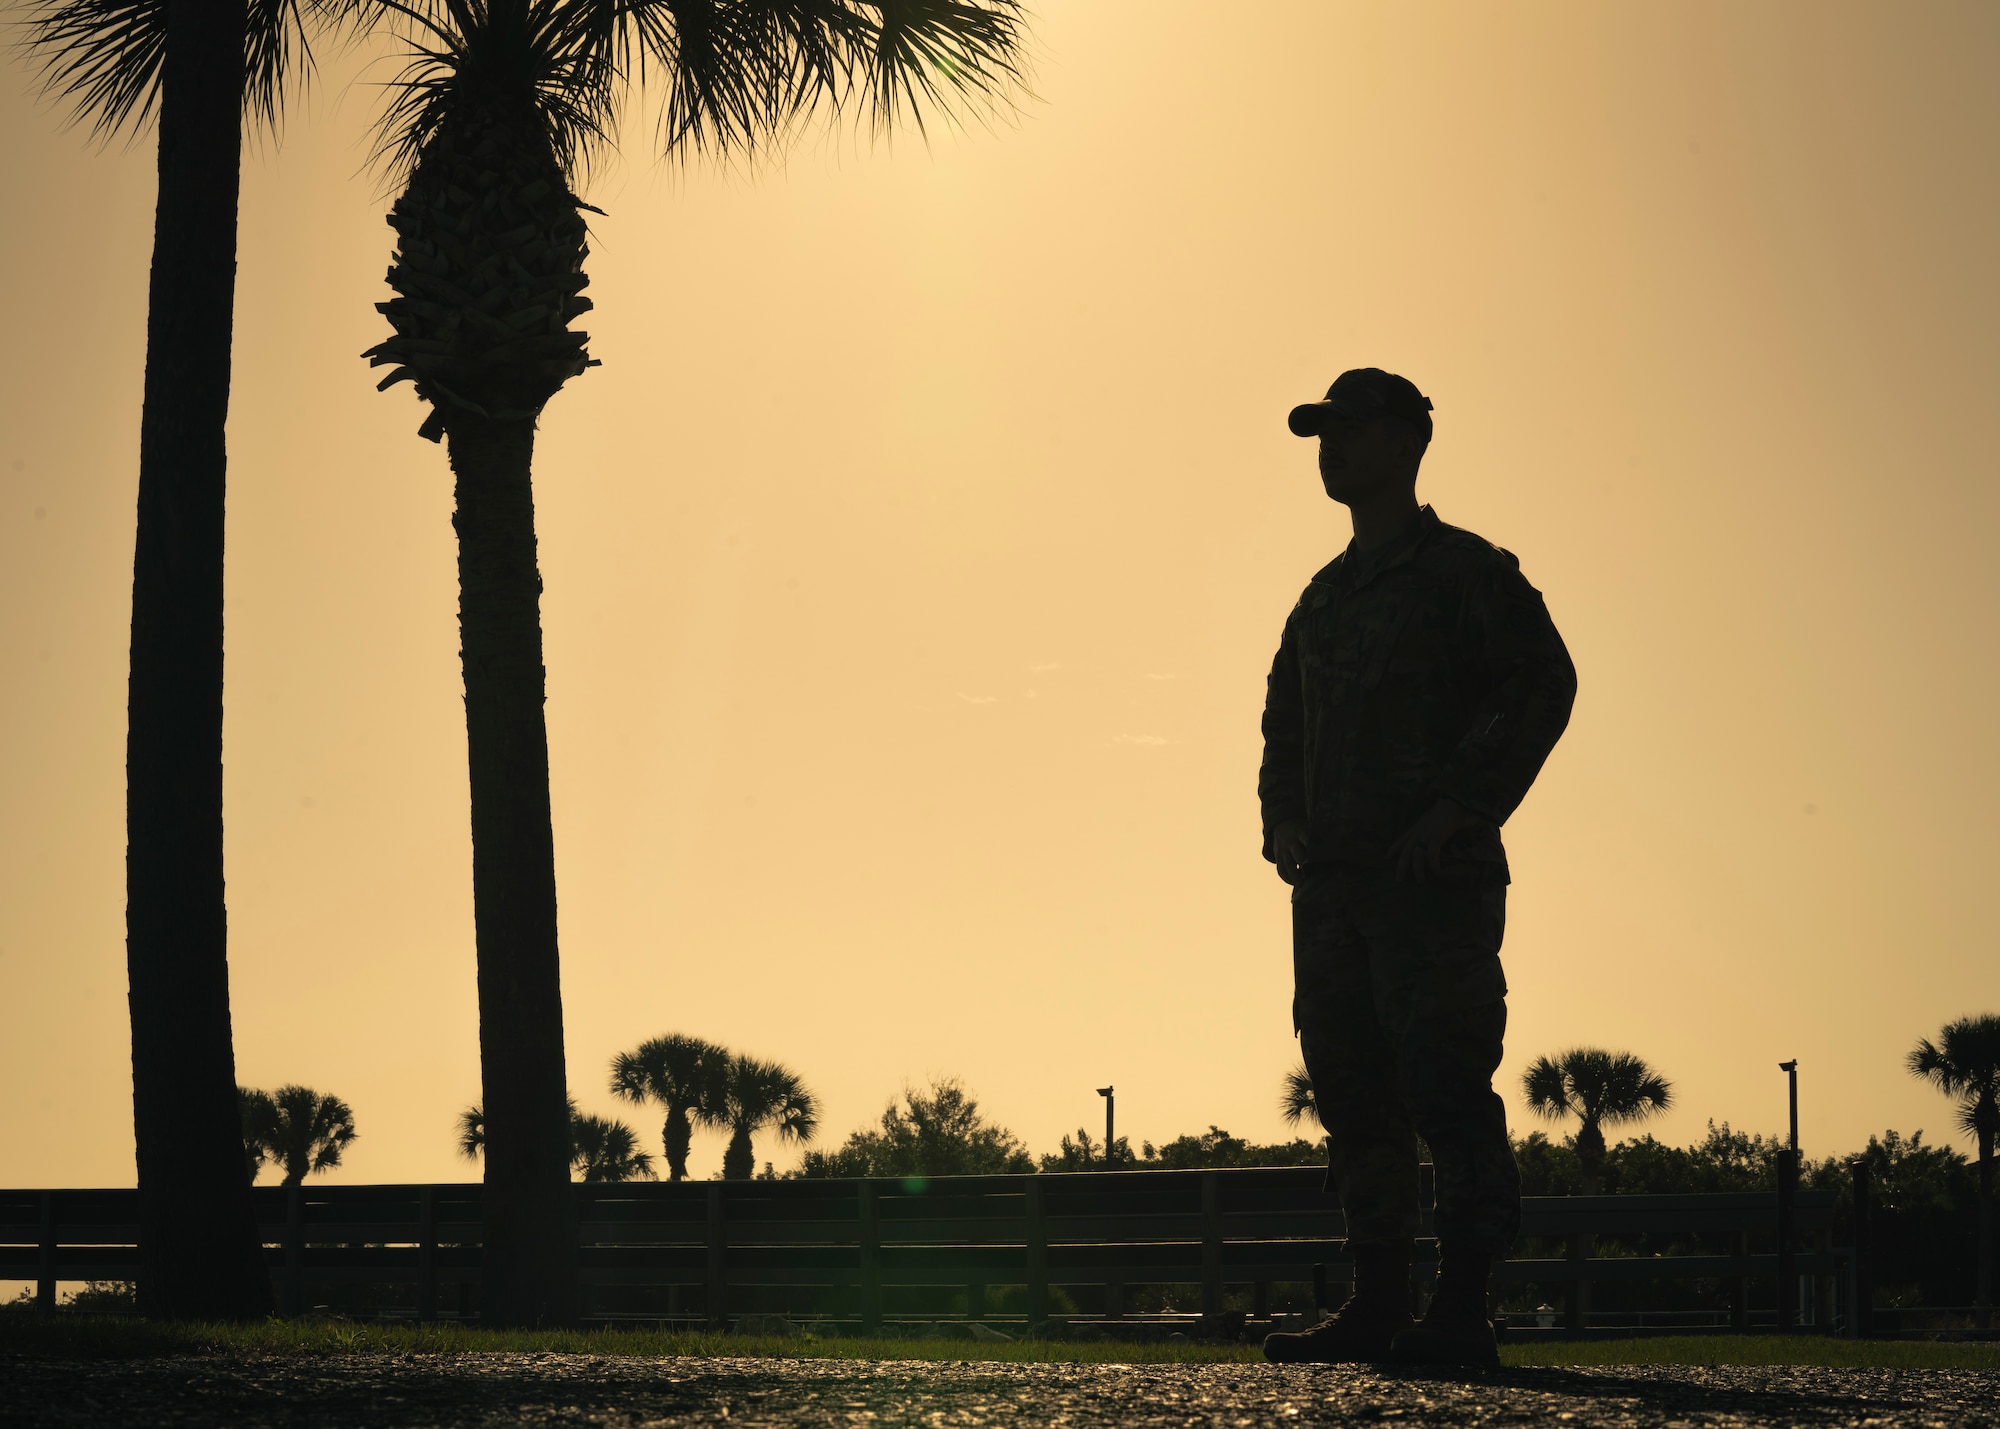 U.S. Air Force Airman 1st Class Ricky King, 6th Communications Squadron Radio Frequency Transmission Systems technician, poses for a photo at MacDill Air Force Base, Florida, March 7, 2022.